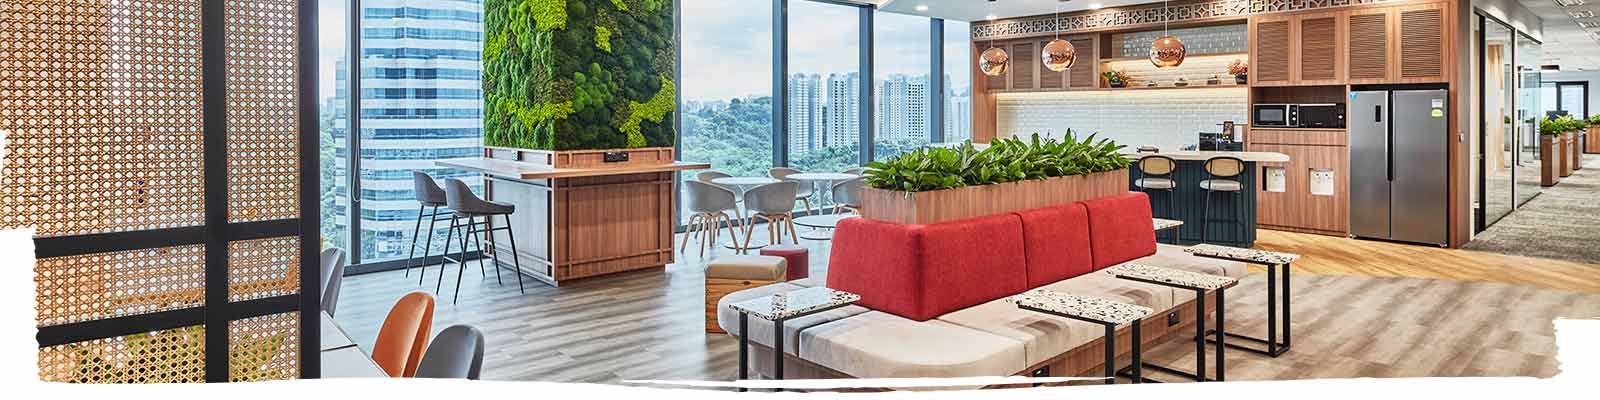 Social hub at Hilti’s new Singapore office with variety of seating